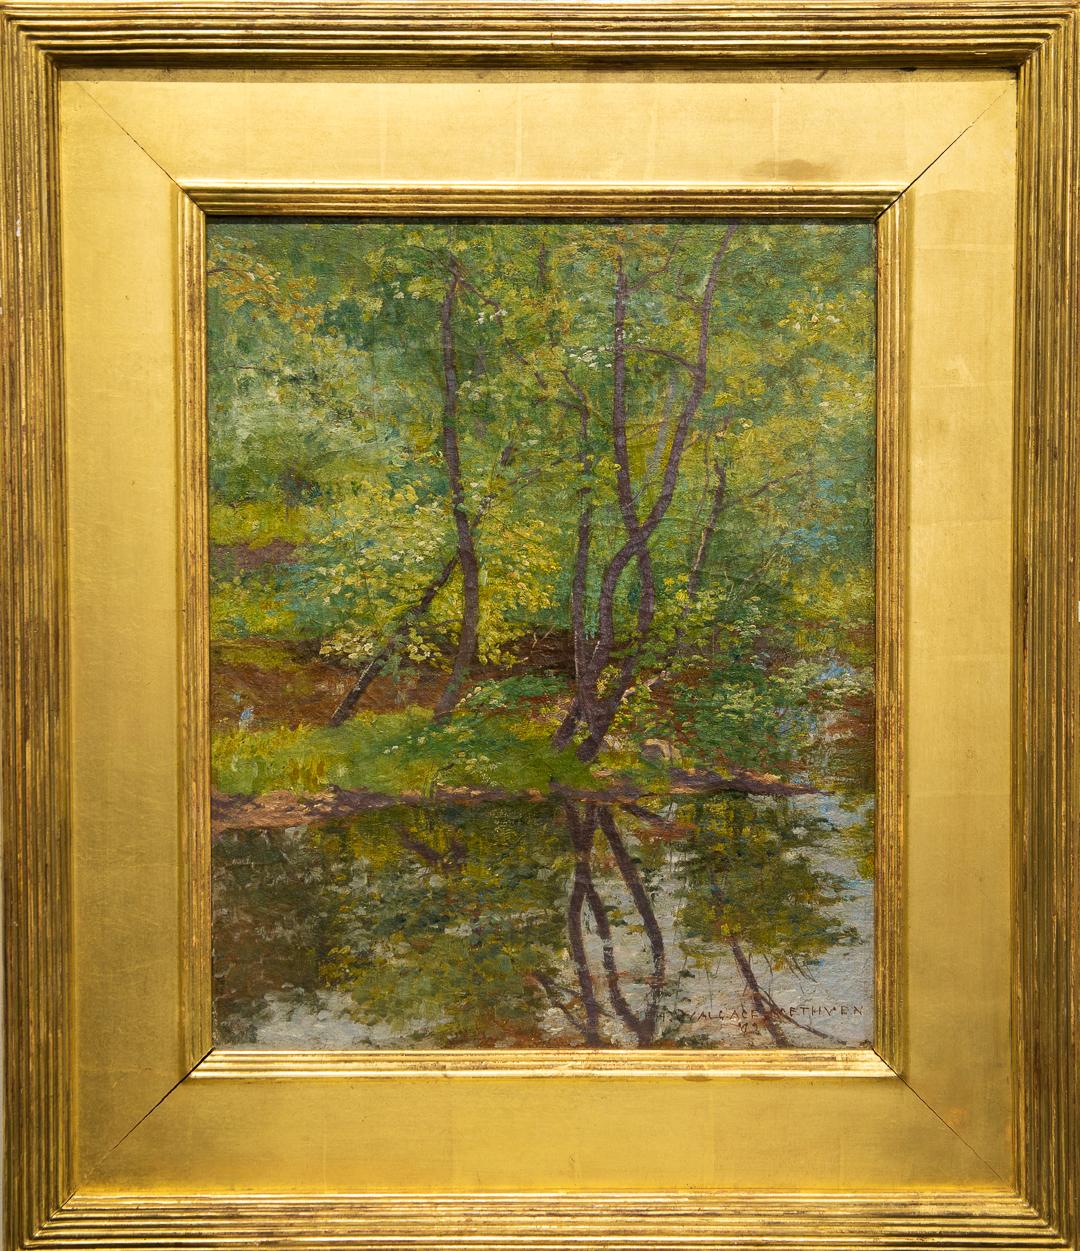 "Impressionist Landscape" Water, Trees, Summer, Reflection, Quiet, Colors